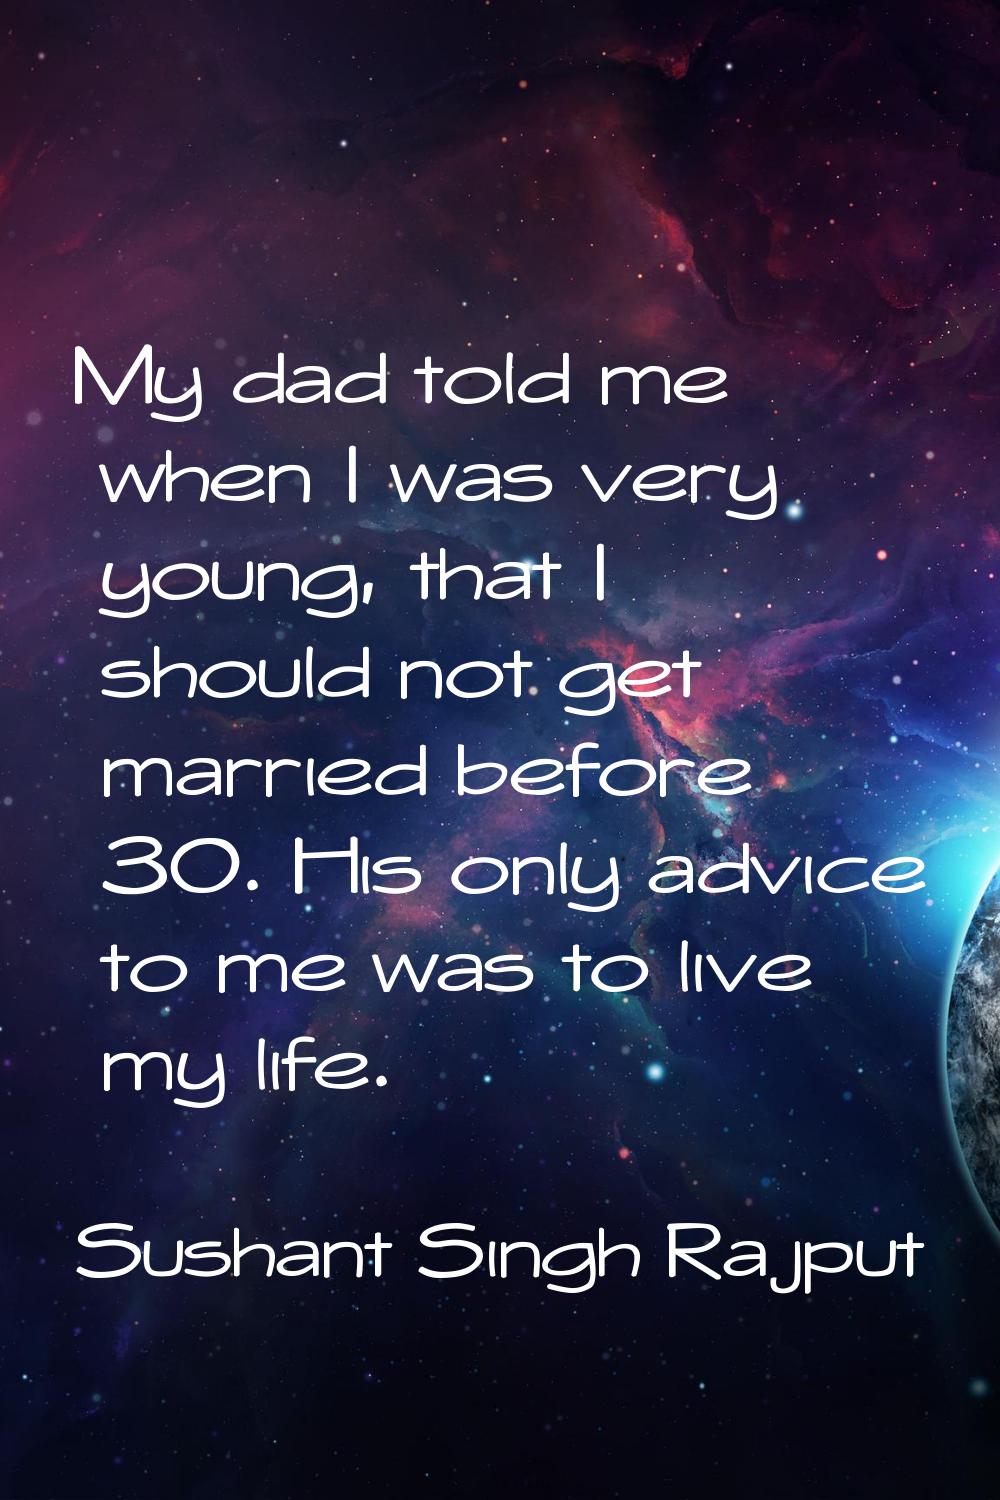 My dad told me when I was very young, that I should not get married before 30. His only advice to m